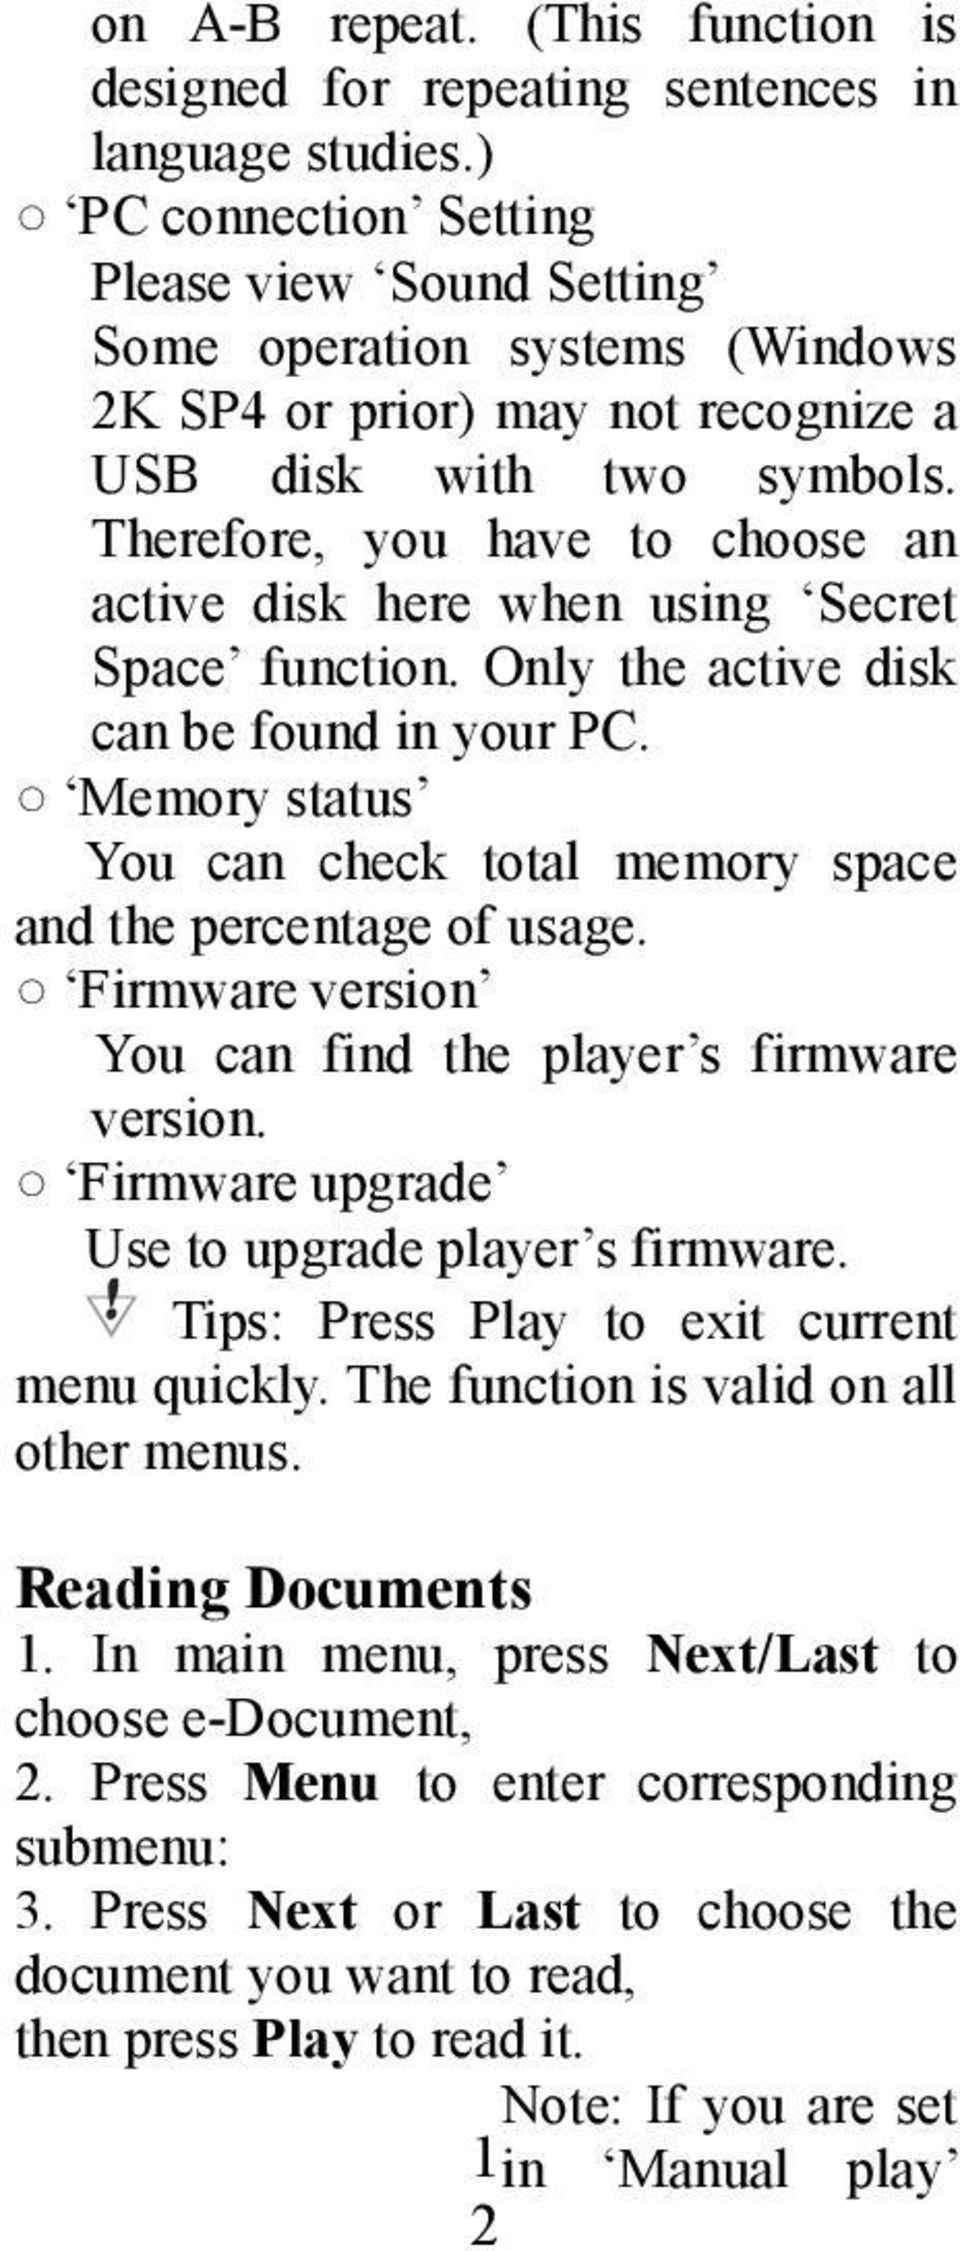 Therefore, you have to choose an active disk here when using Secret Space function. Only the active disk can be found in your PC.